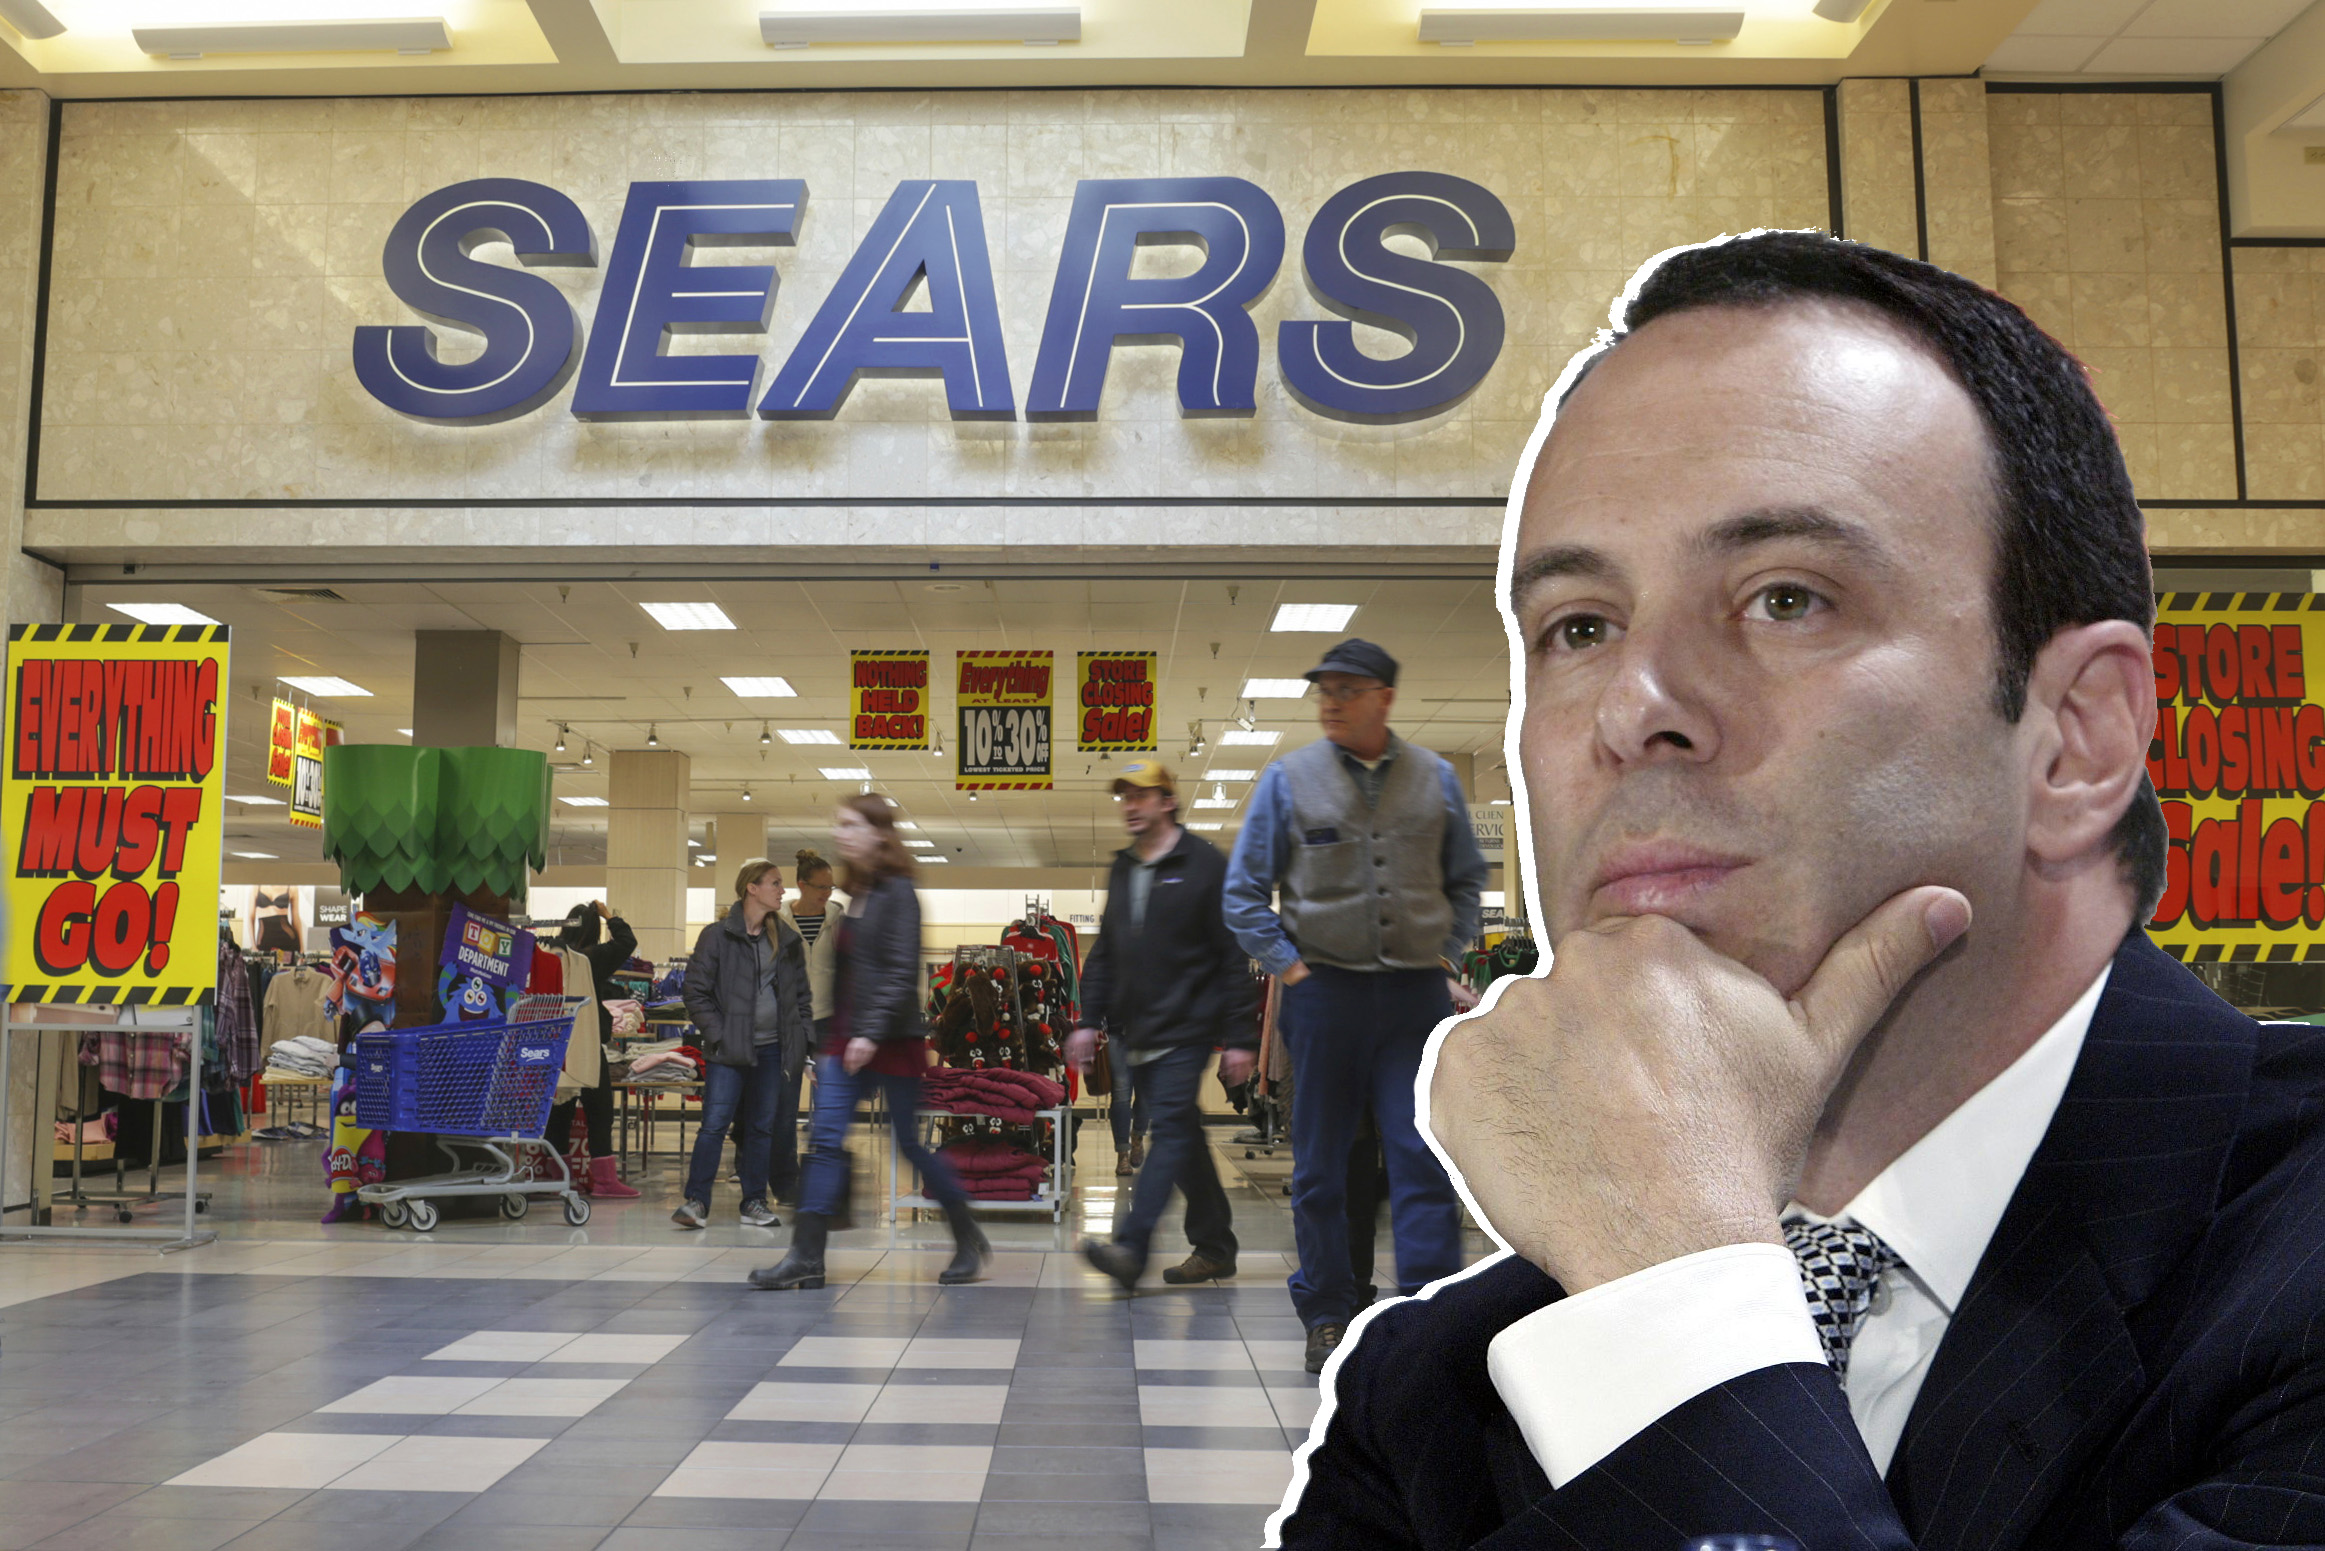 ‘I Have No Hope.’ Sears Workers Are Worried About Their Jobs After Eddie Lampert’s Takeover